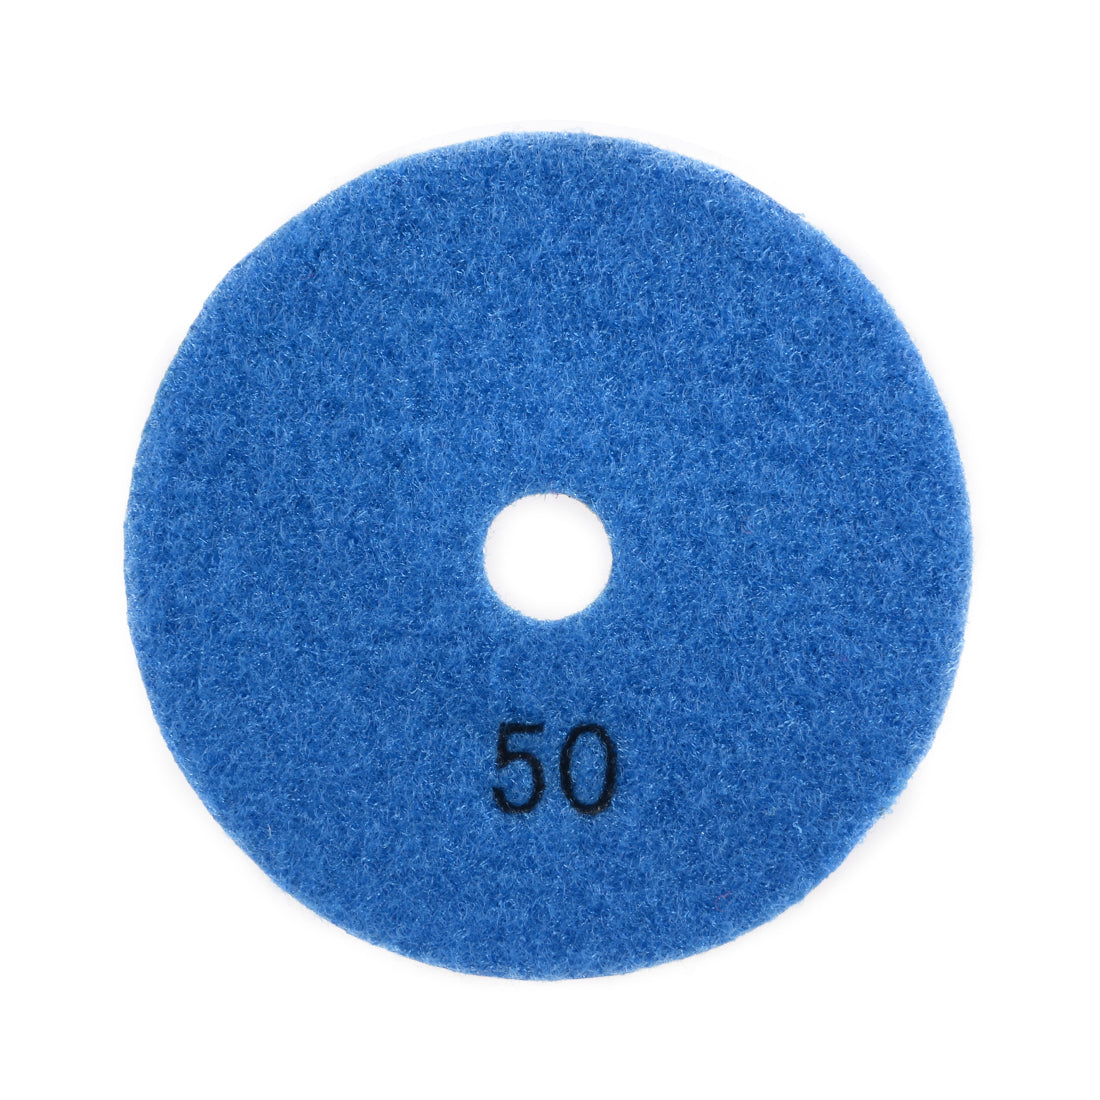 uxcell Uxcell Diamond Polishing Sanding Grinding Pads Discs 4 Inch Grit 50 3 Pcs for Granite Concrete Stone Marble